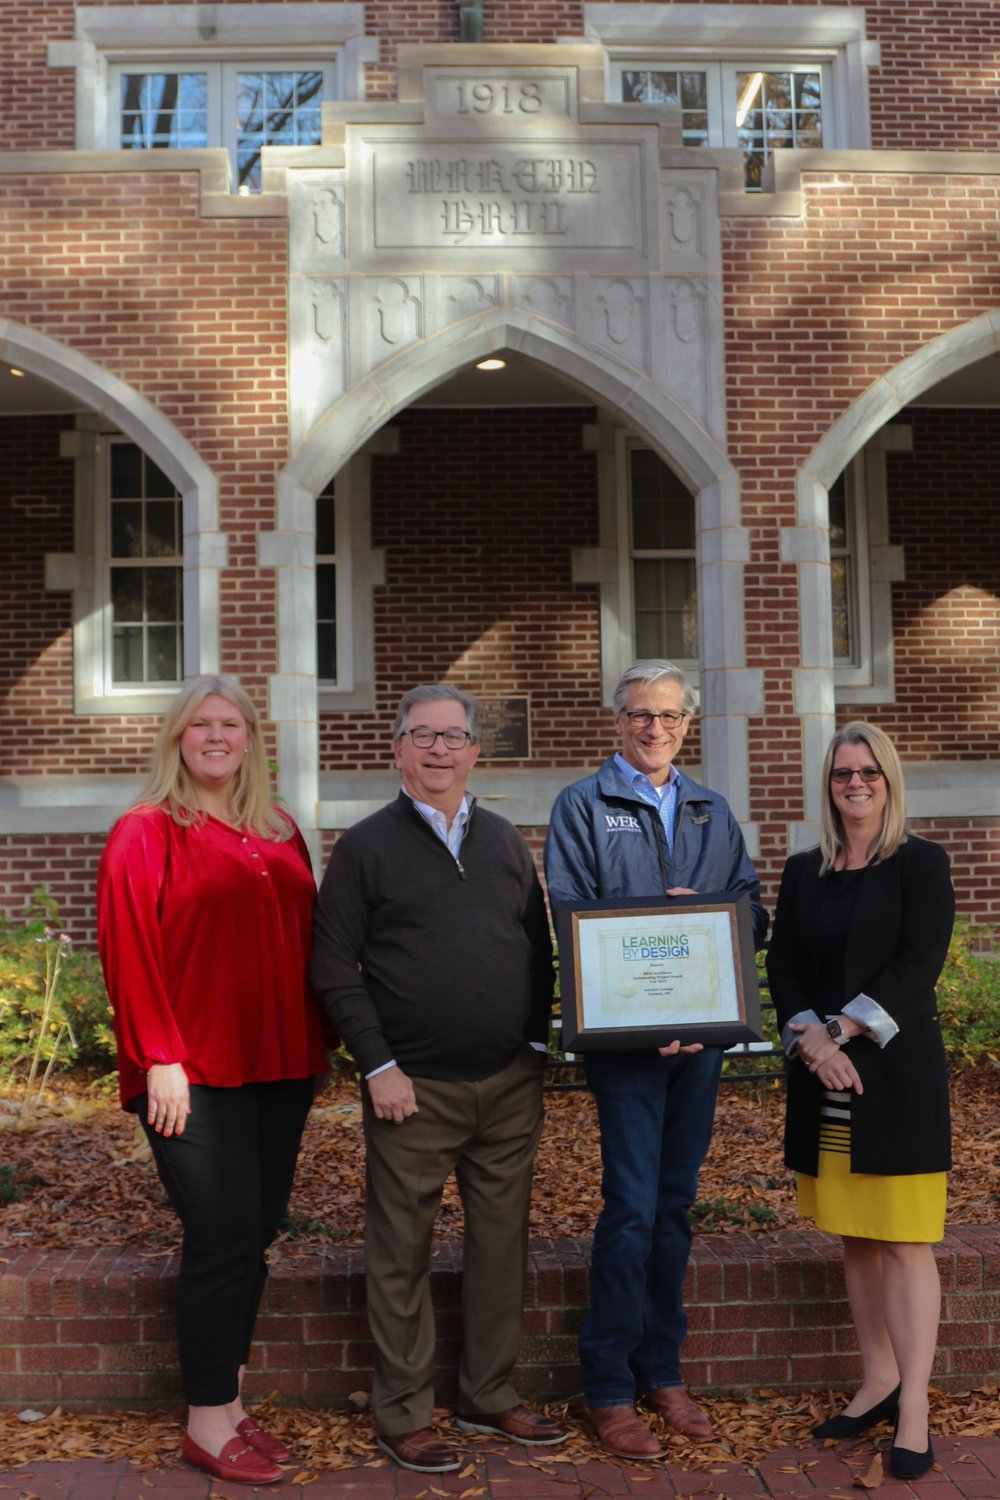  Leaders from Hendrix College and WER Architects gathered on December 12 to mark the honors that last year’s residence hall renovation projects have received. From left: Greer Veon, Hendrix College Director of Residential Life; Ellis Arnold, Presiden